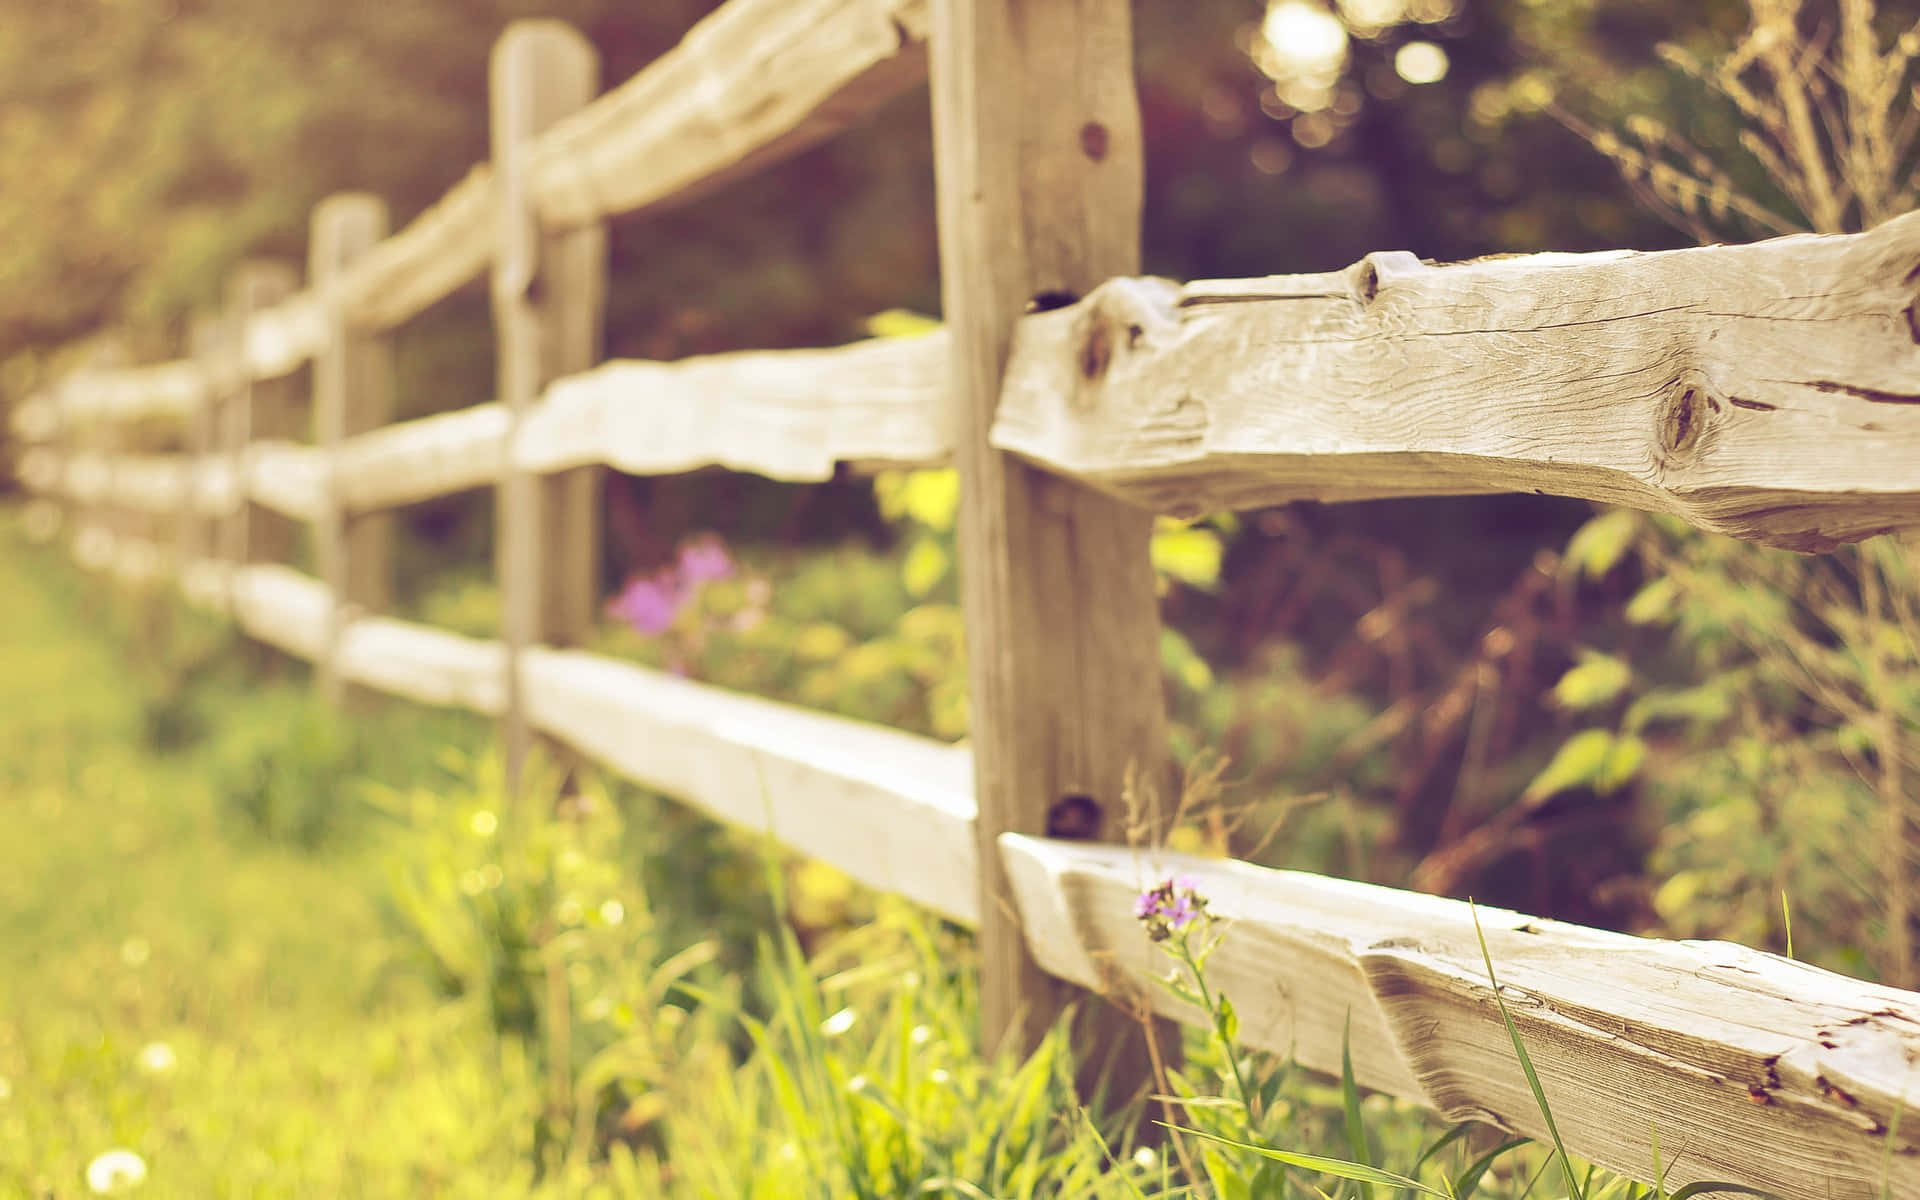 A Wooden Fence In The Grass